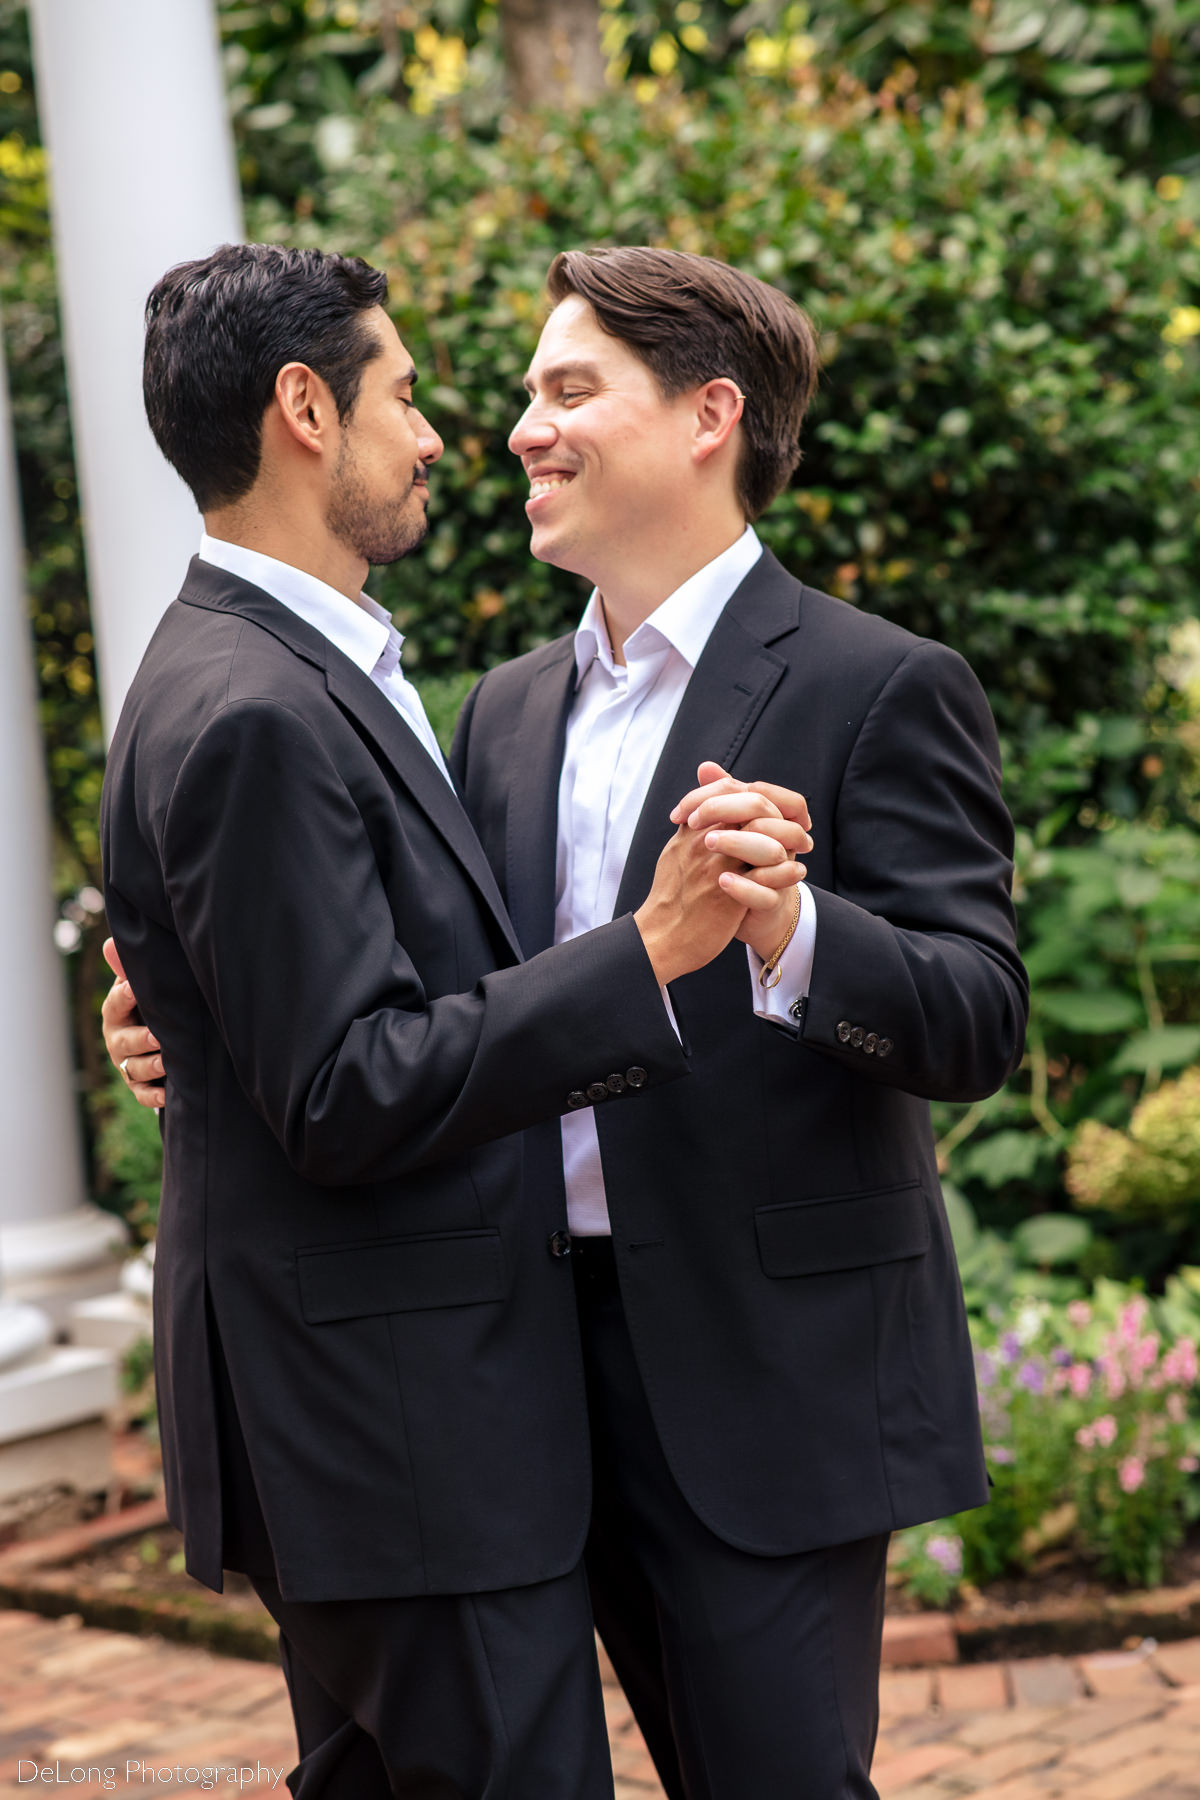 Candid moment of grooms laughing and smiling together dancing in the gardens of the Duke Mansion by Charlotte wedding photographers DeLong Photography